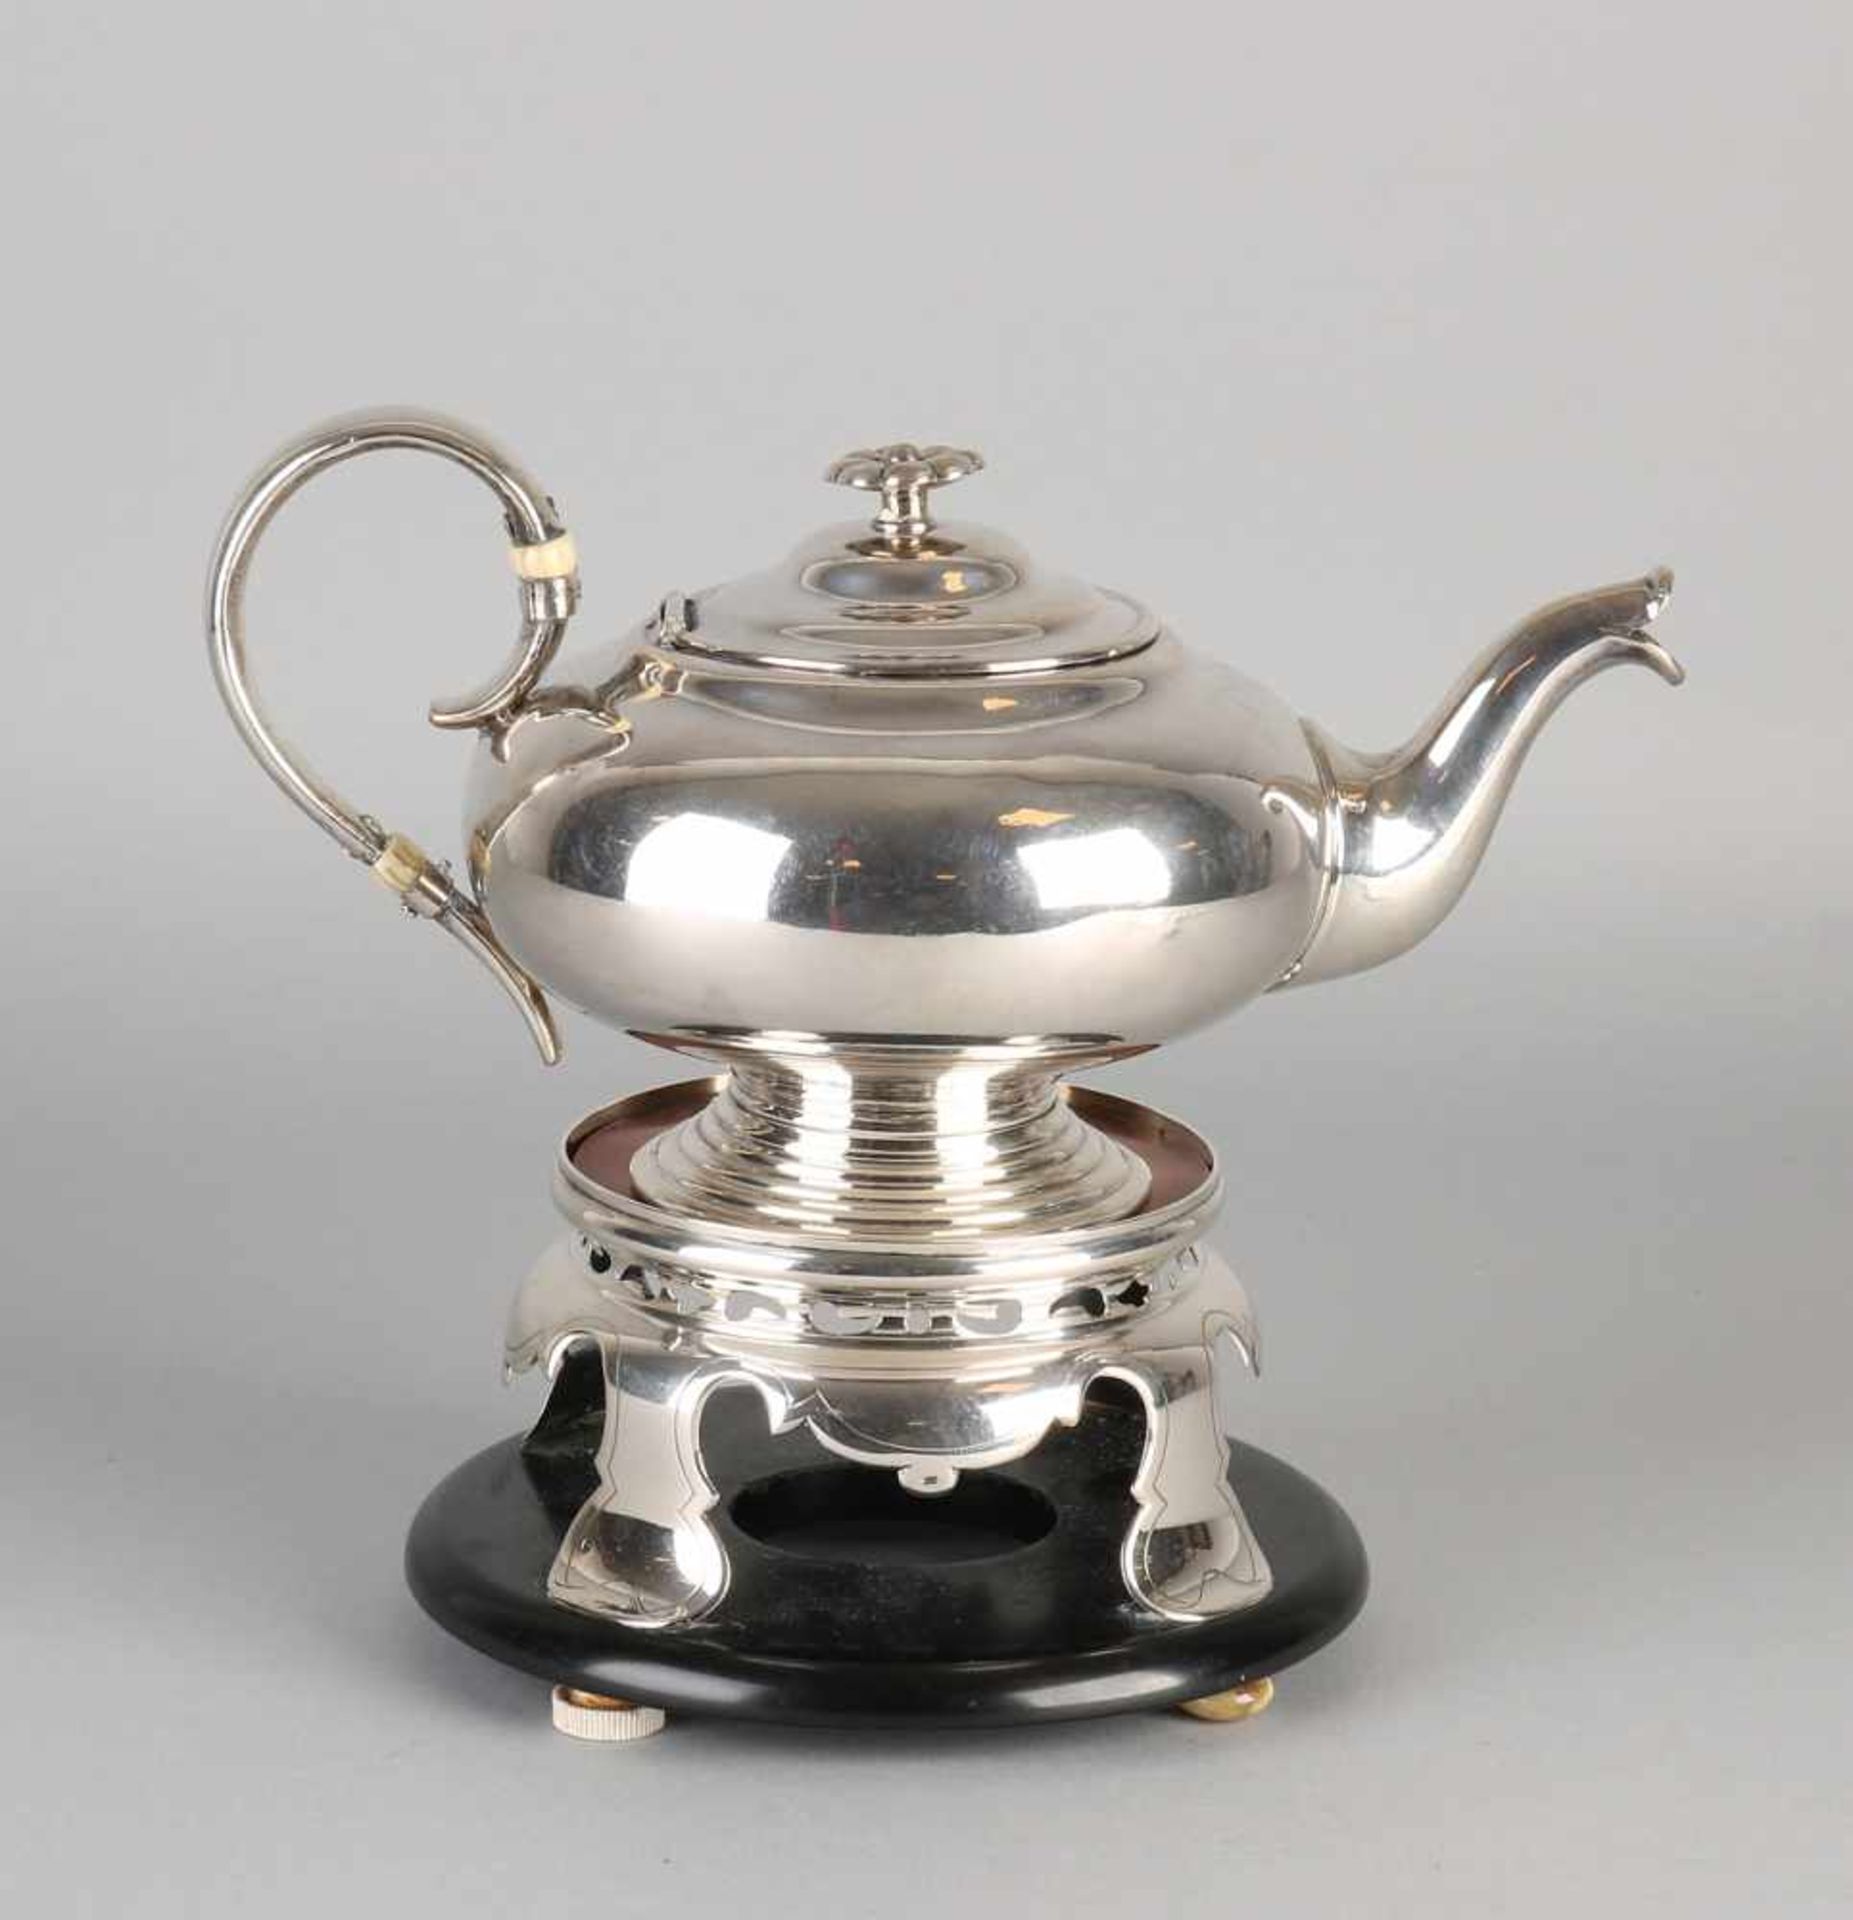 Silver teapot on Comfoor, 833/000. Silver teapot sphere model, on circular base with rings, provided